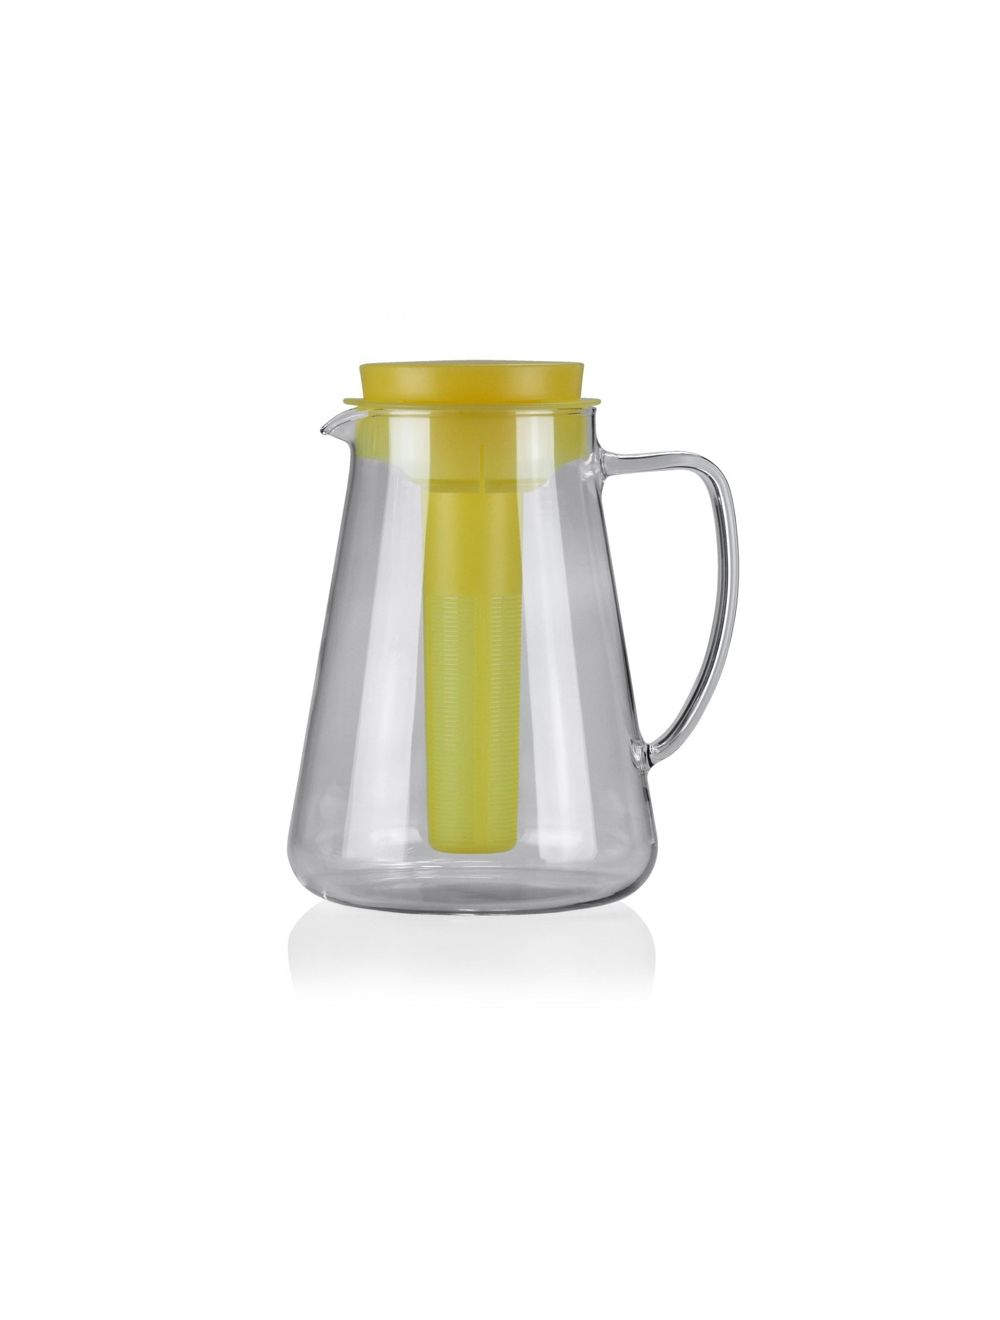 Tescoma Teo Infusion Pitcher Yellow 2.5 L